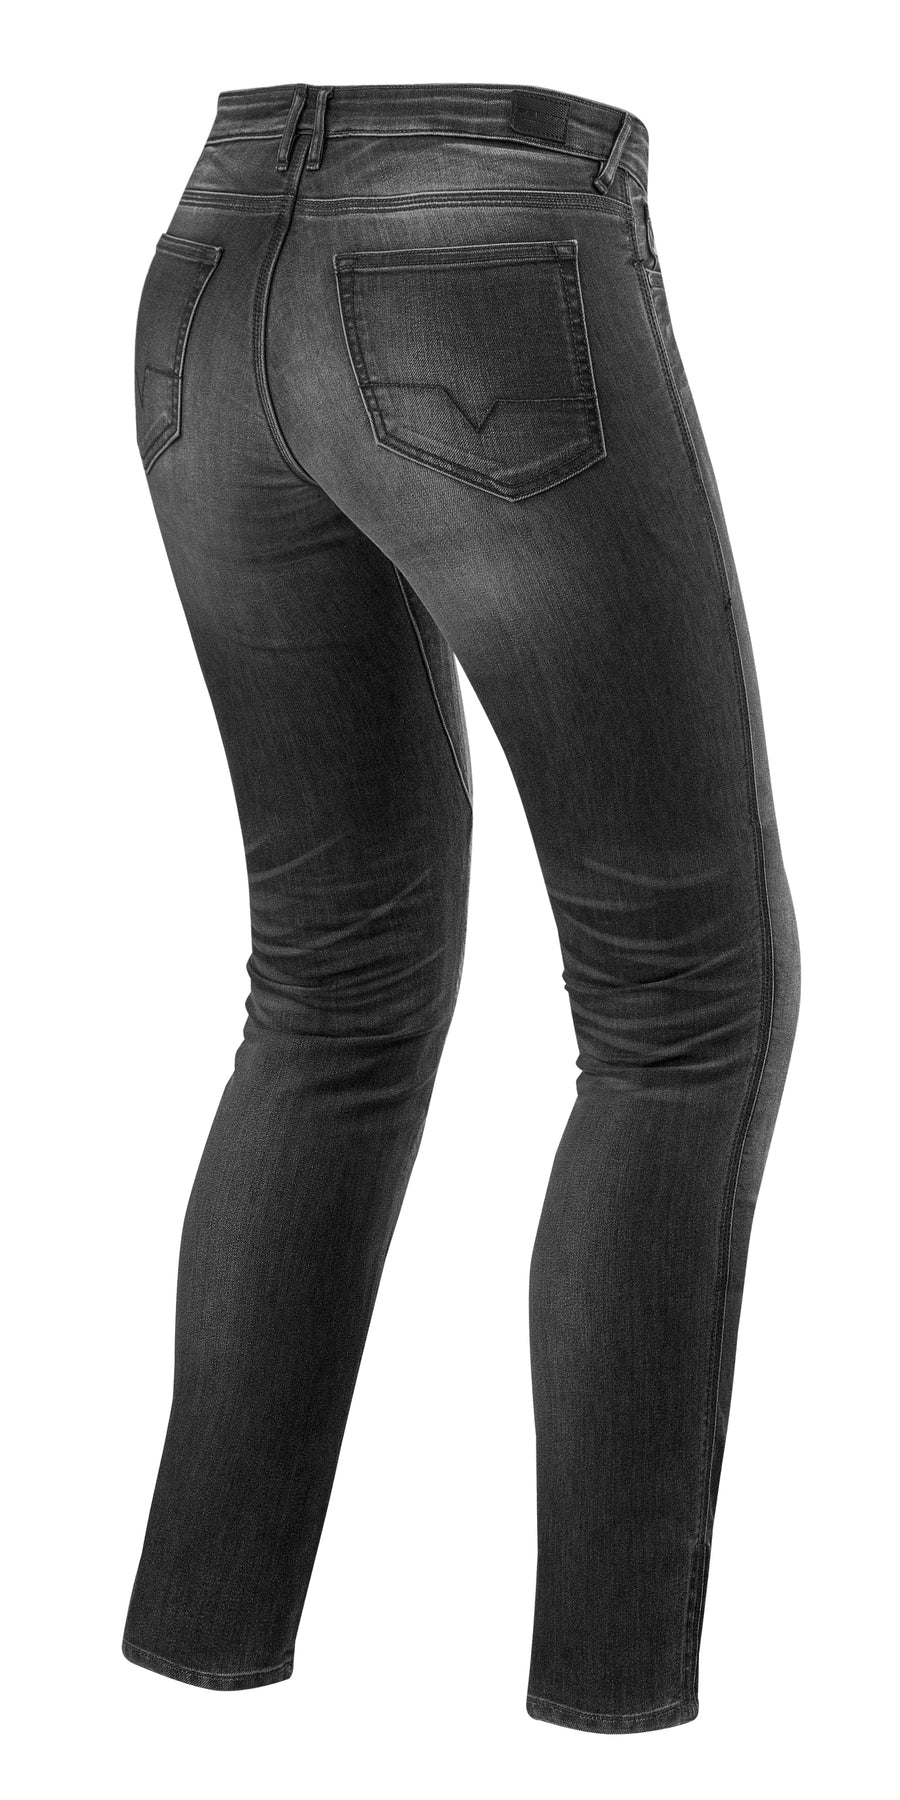 BUY NERVE Ladies Motorcycle Jeans  Moto Jeans Womens ON SALE NOW! - Rugged Motorbike  Jeans